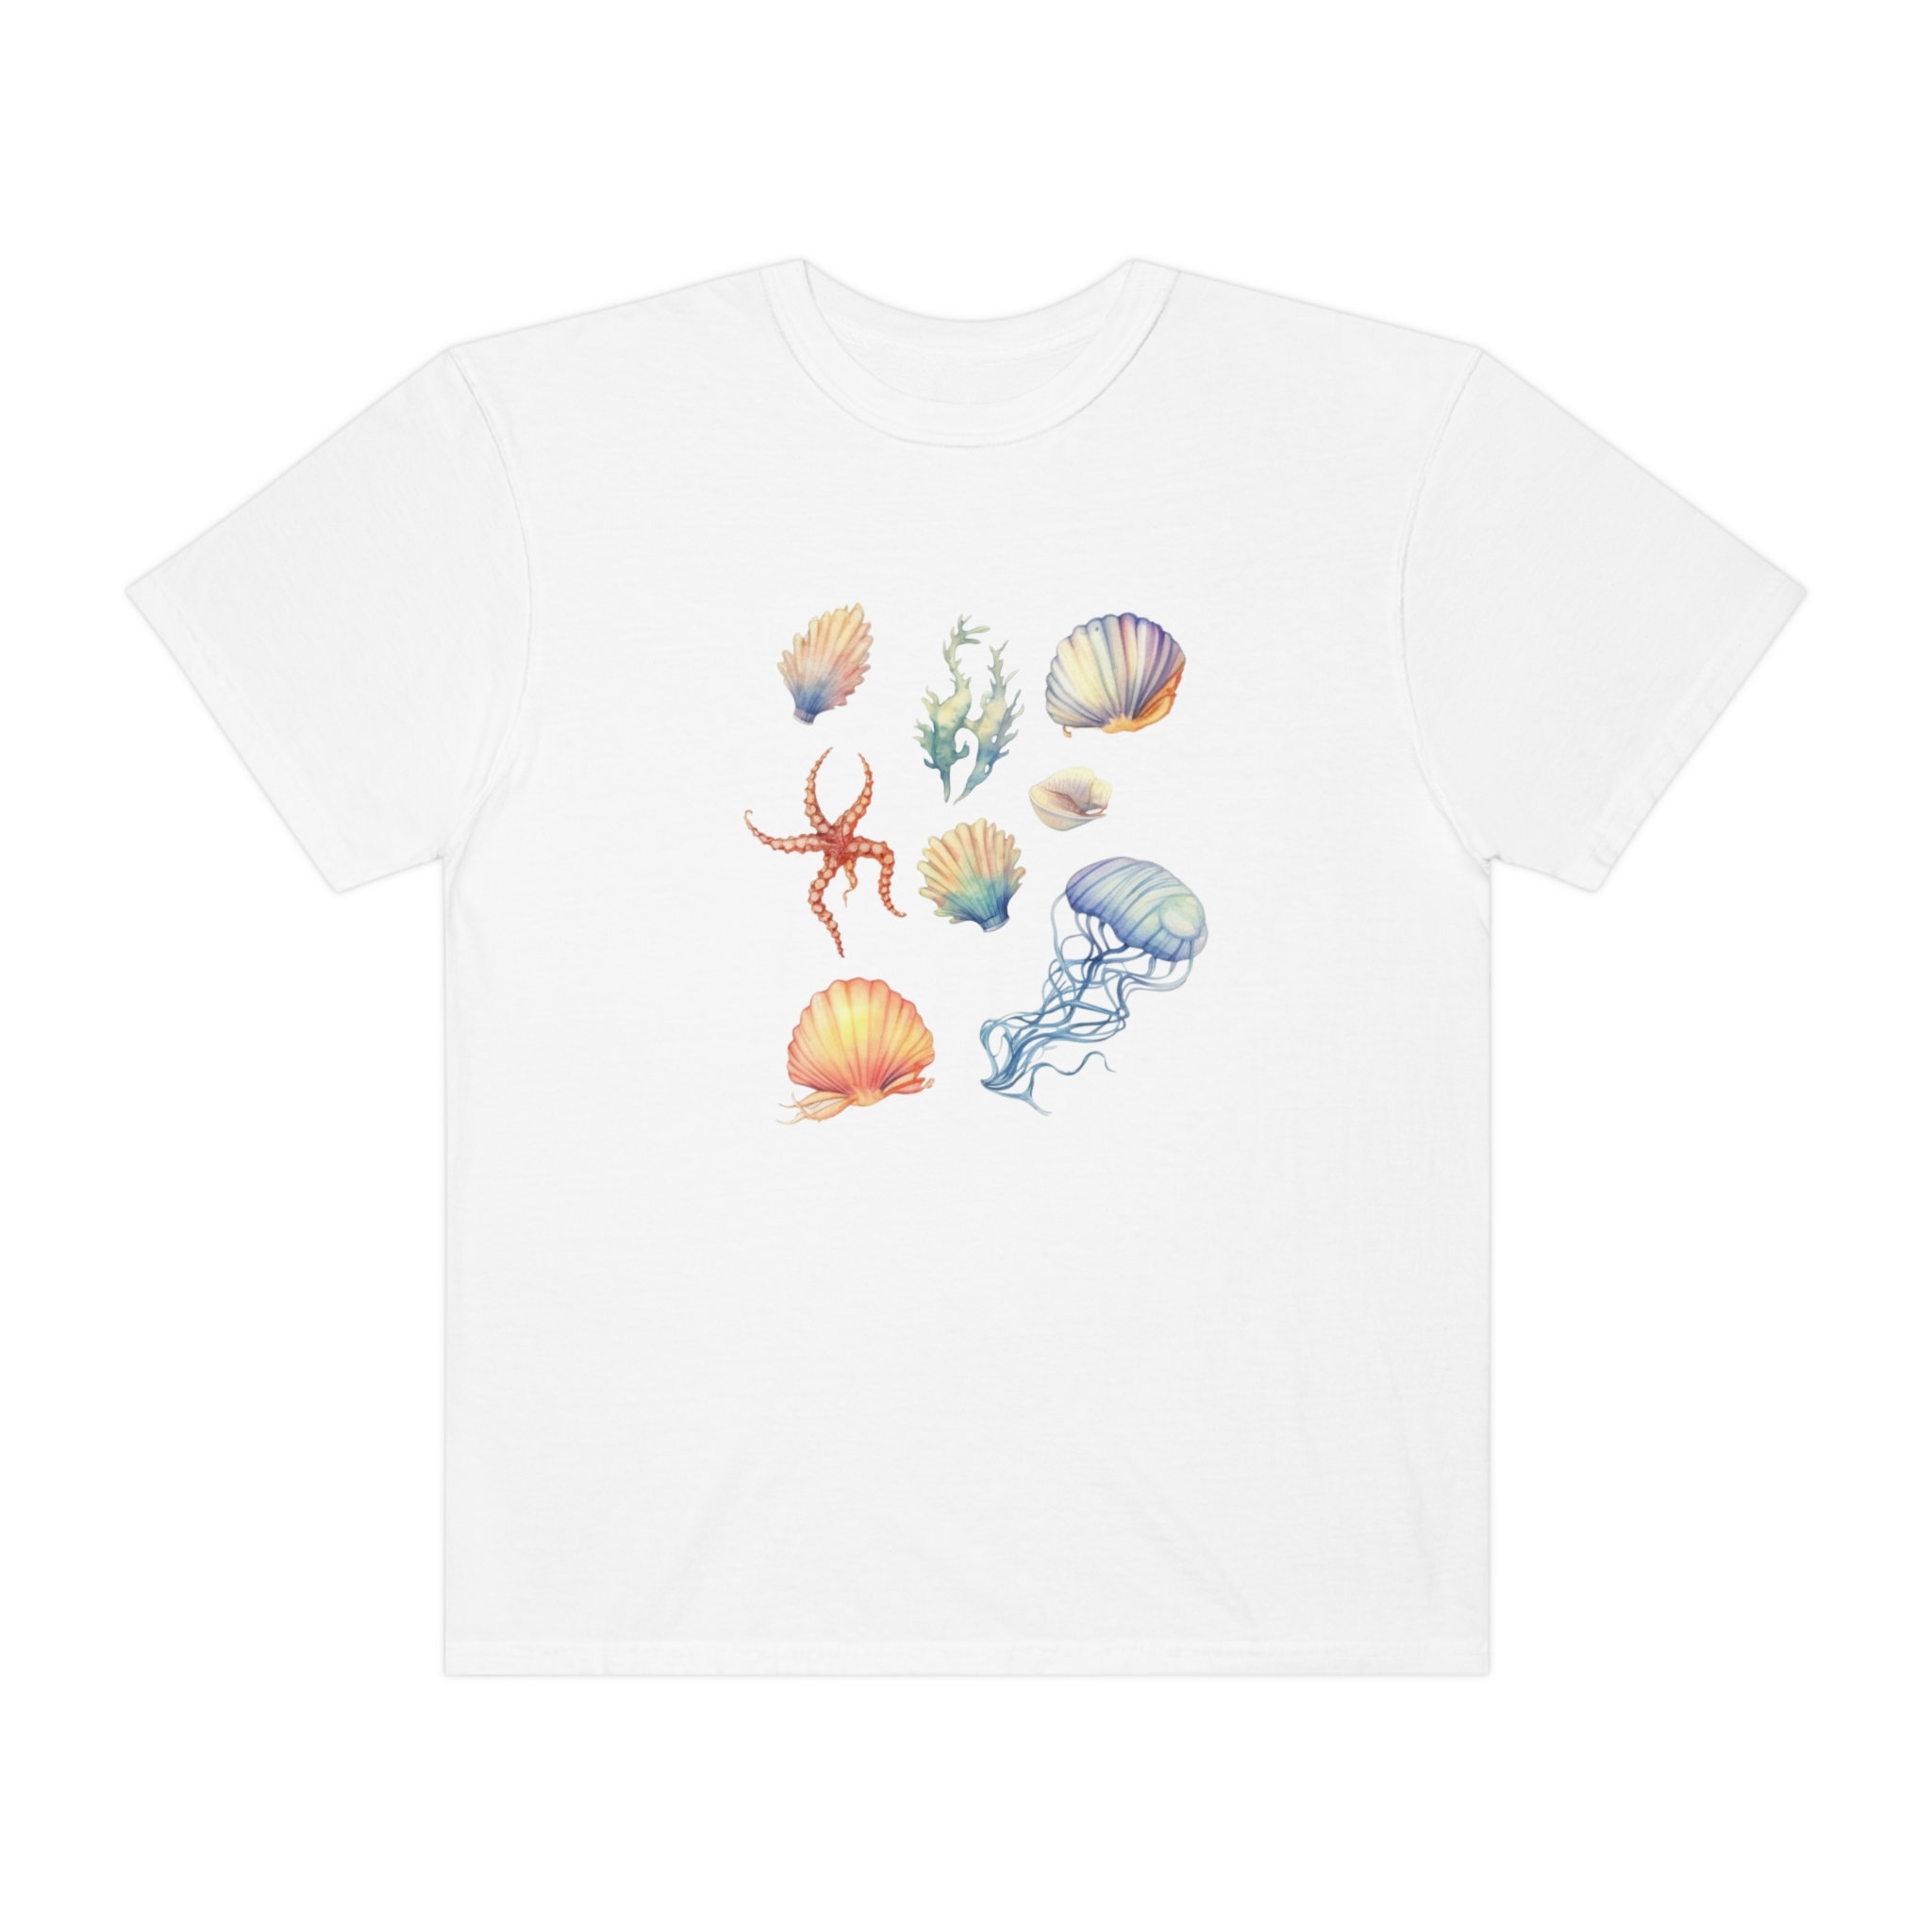 Trendy Sea Creatures Y2K Marine Shirt - Aesthetic Clothing Gift for Her